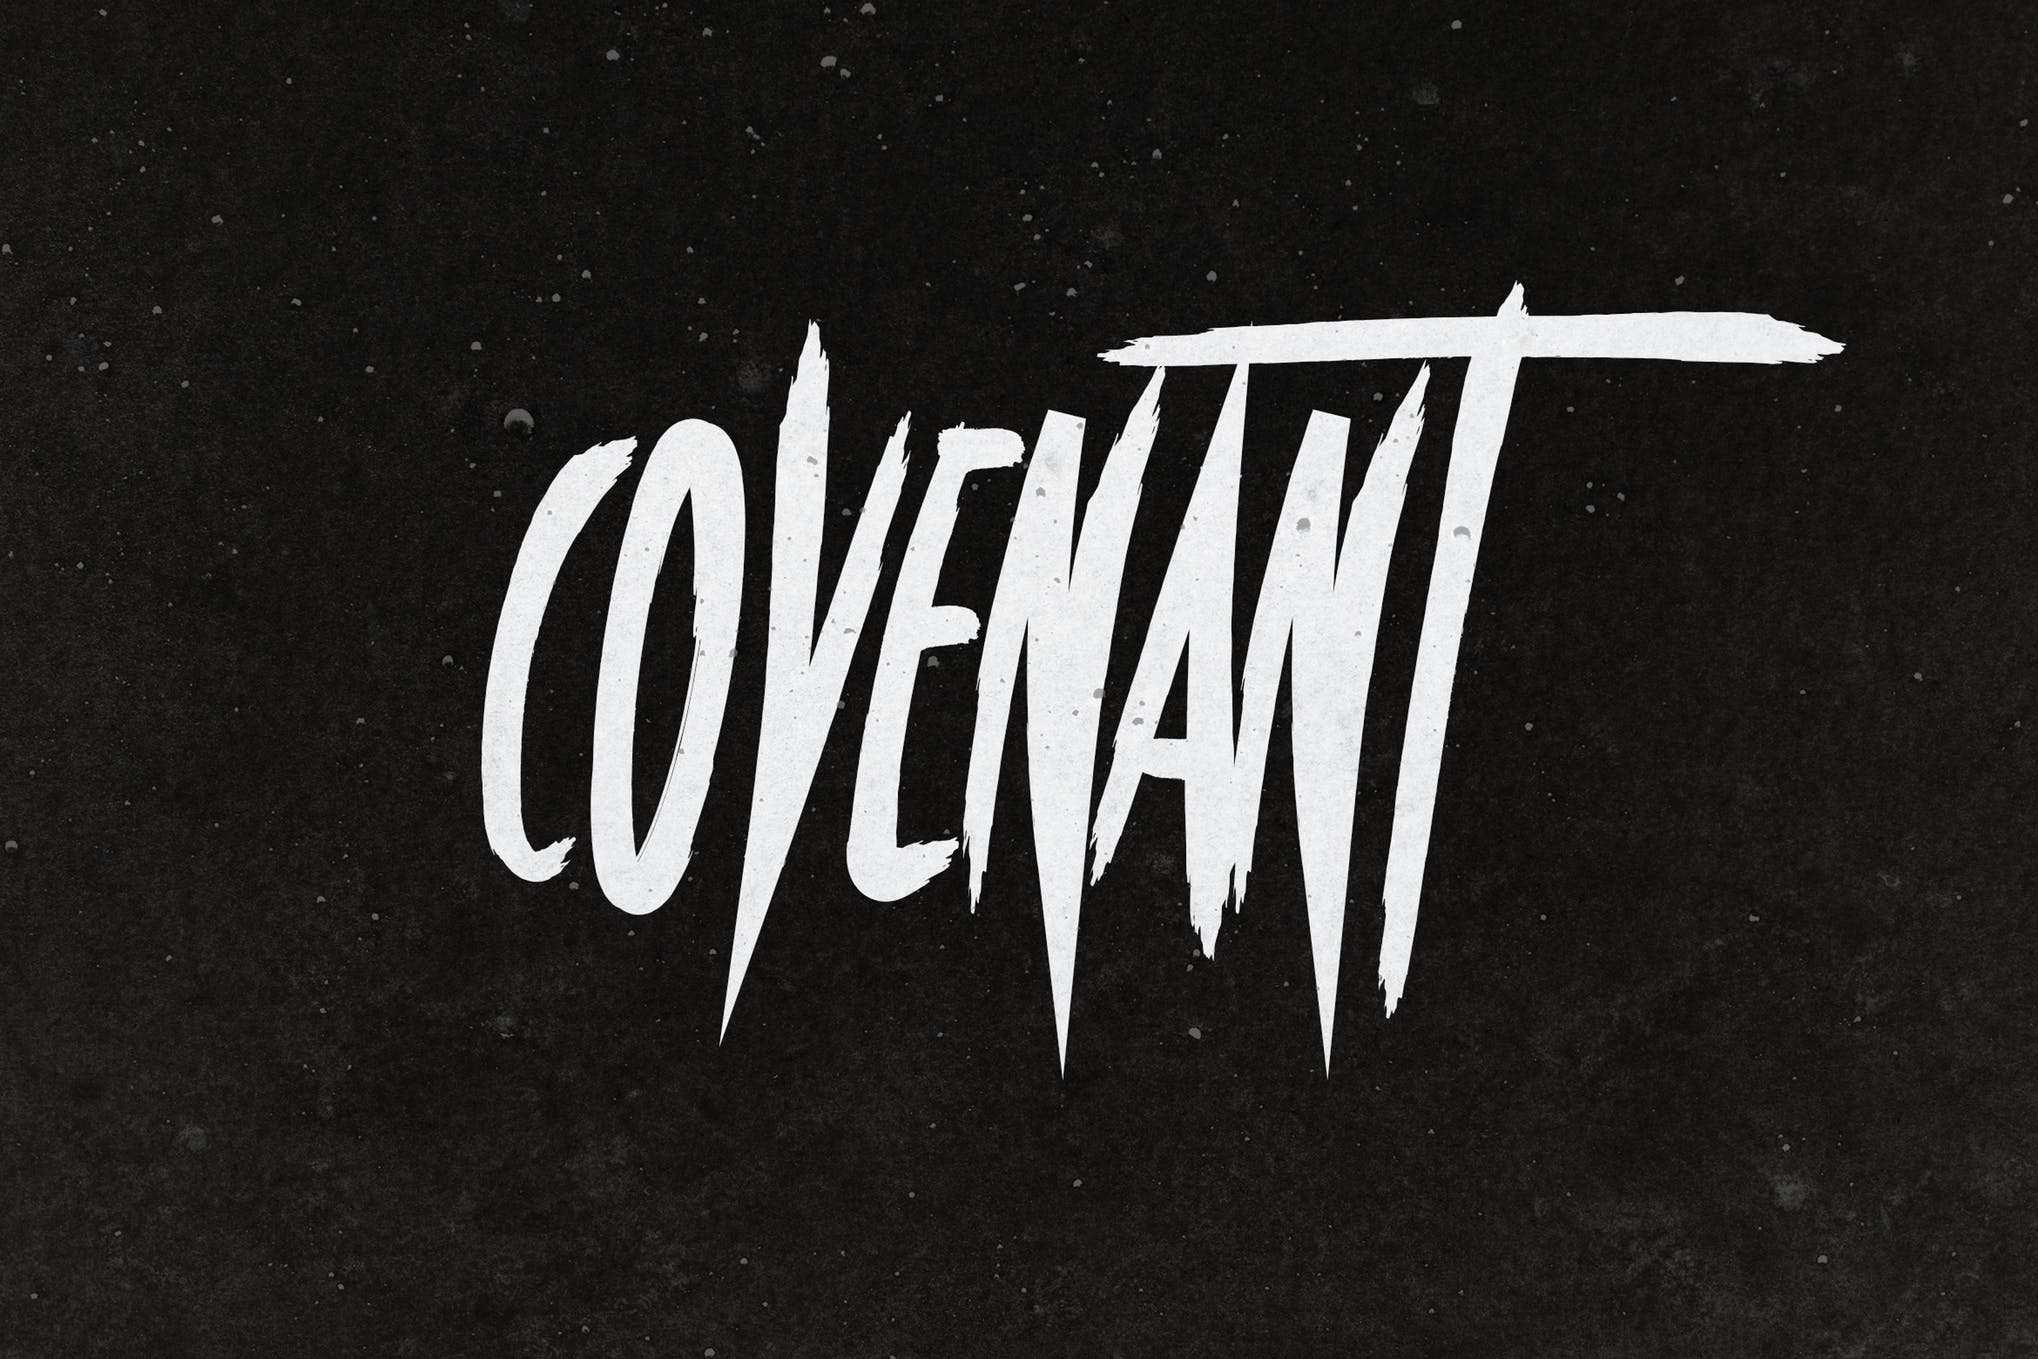 Covenant - Halloween Fonts for 2019